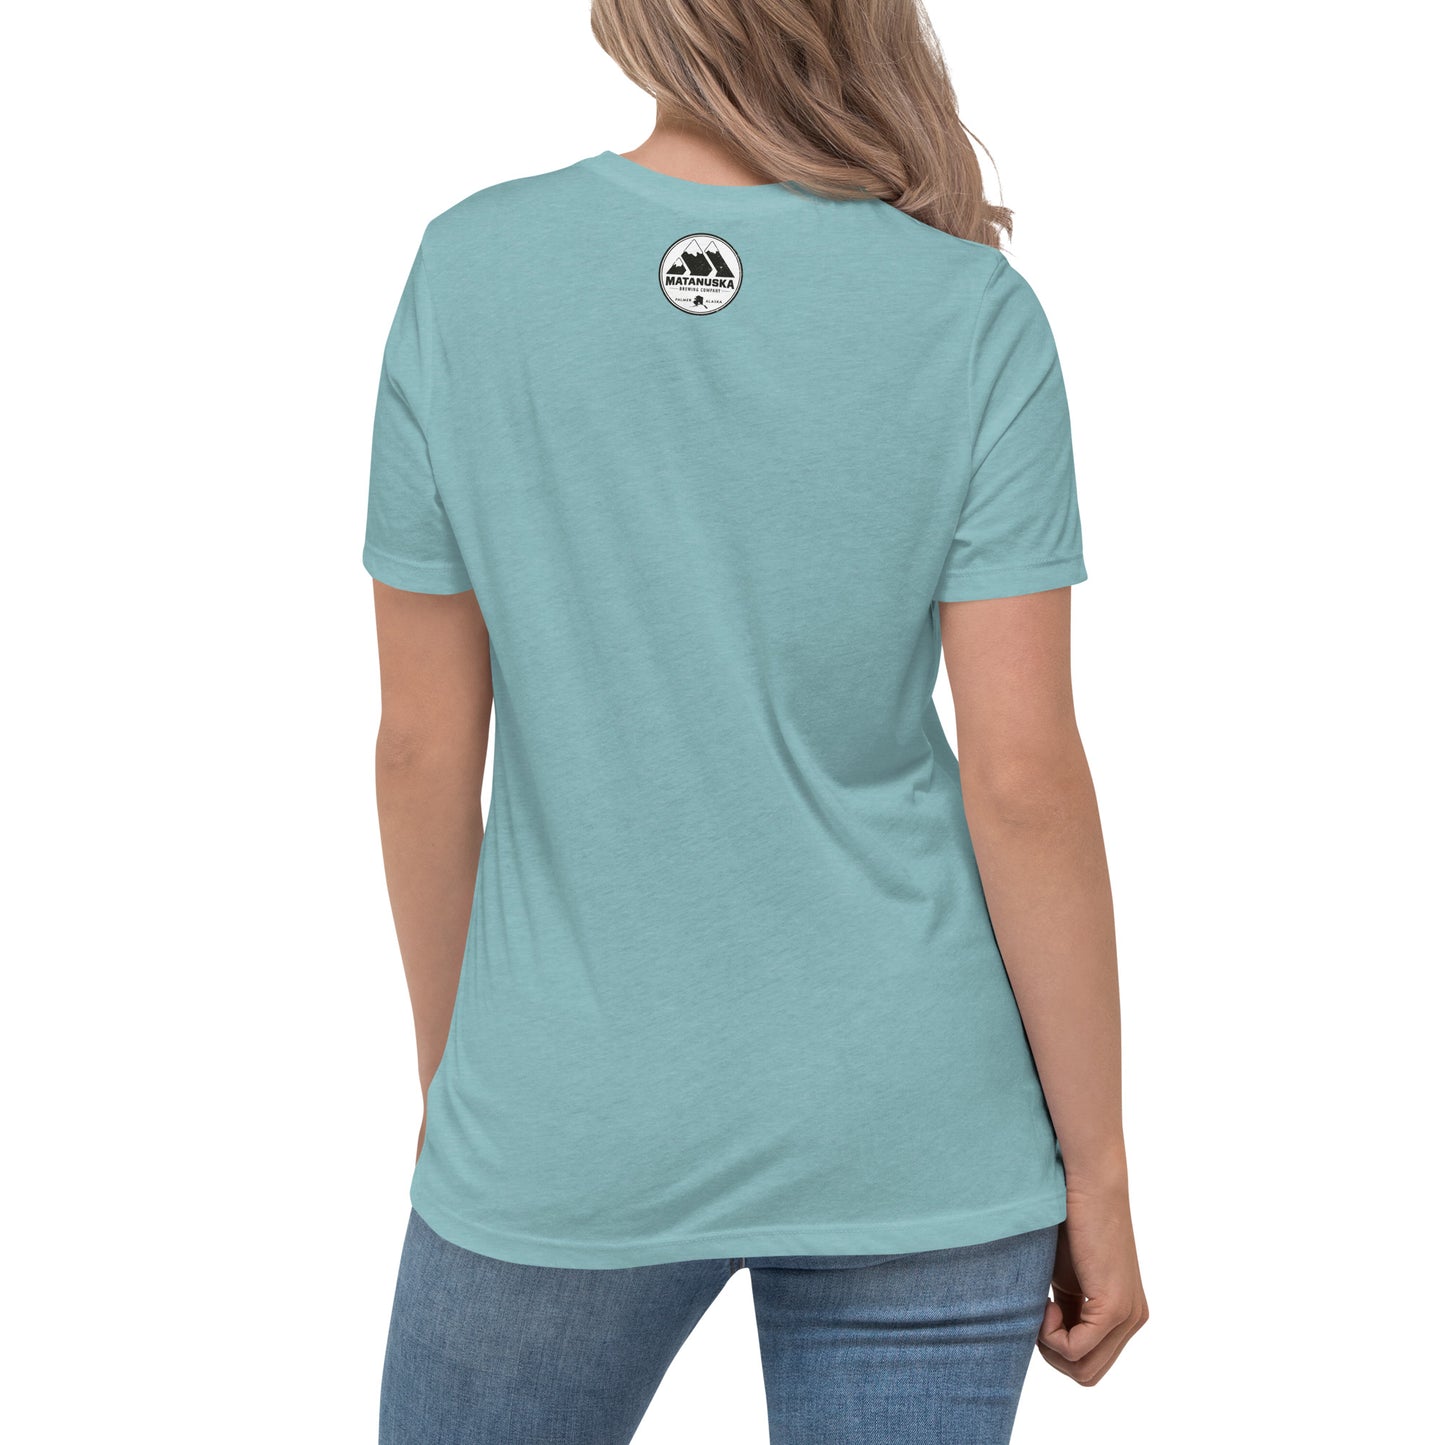 Drink Local Women's Relaxed T-Shirt